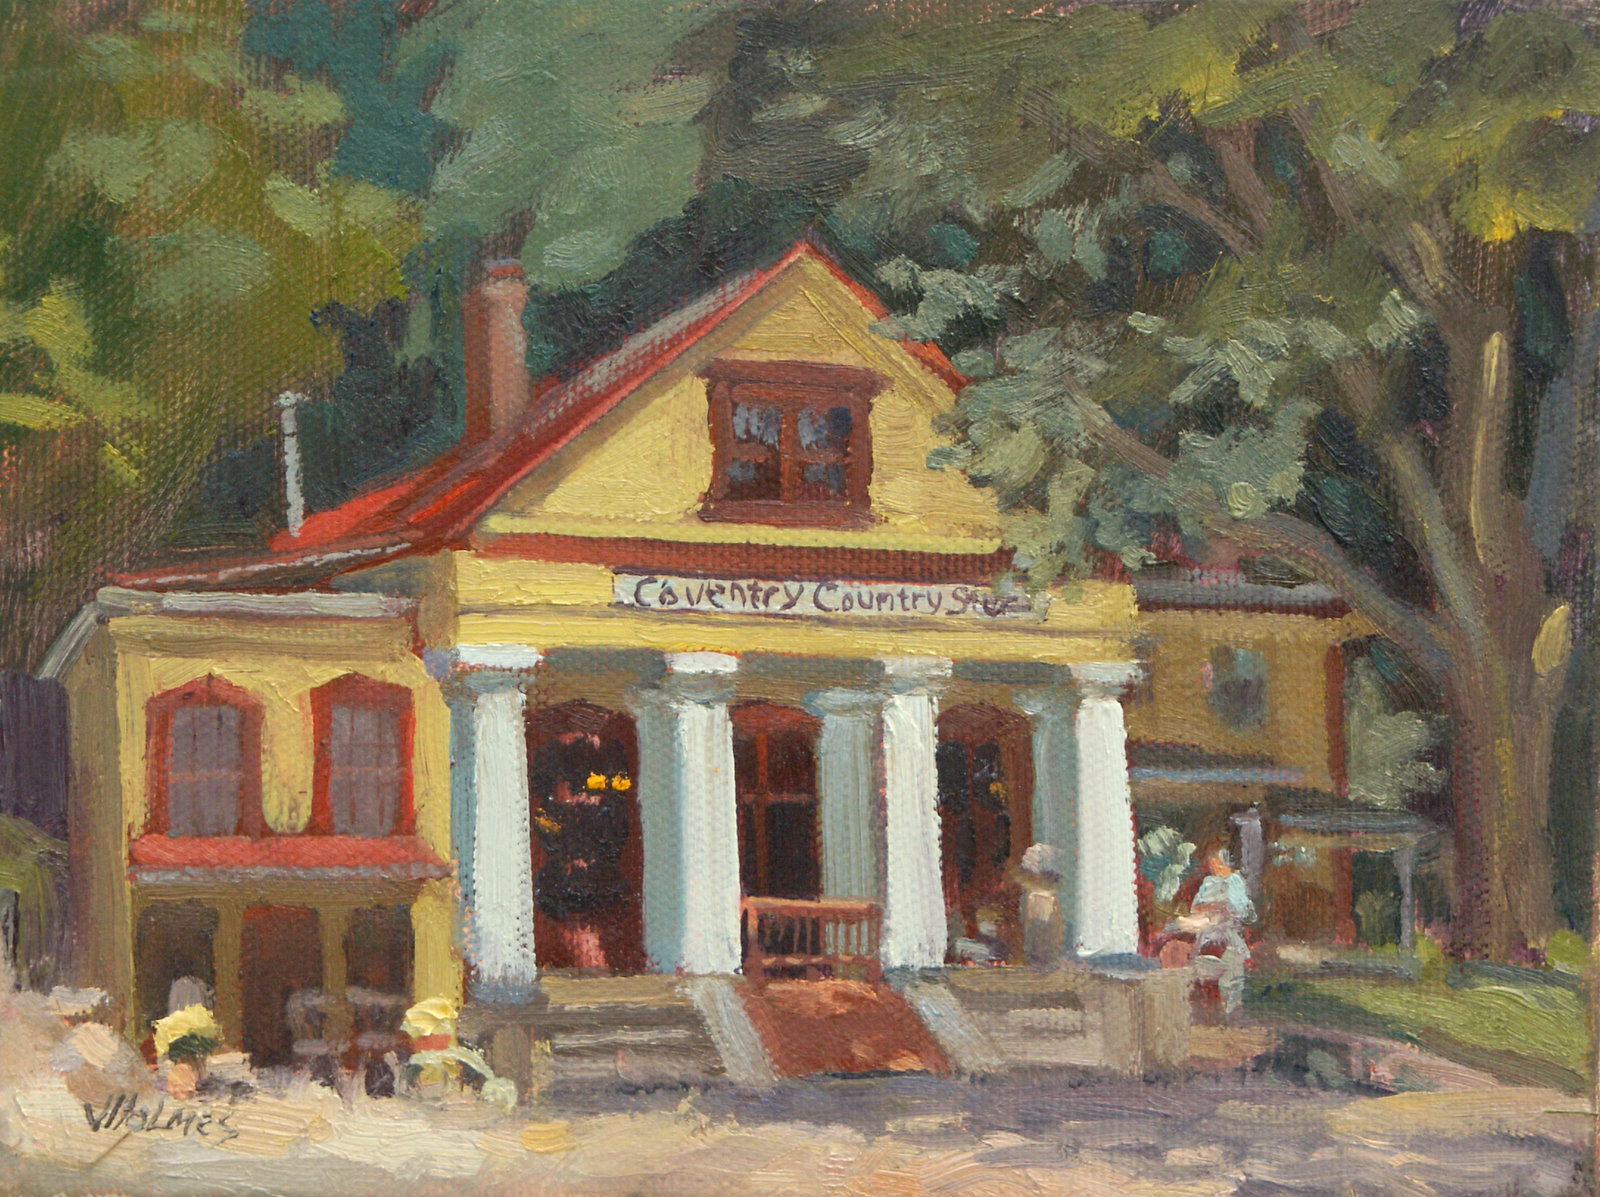 [Coventry+Country+Store++6x8+$500+oil+Jennifer+Holmes.jpg]